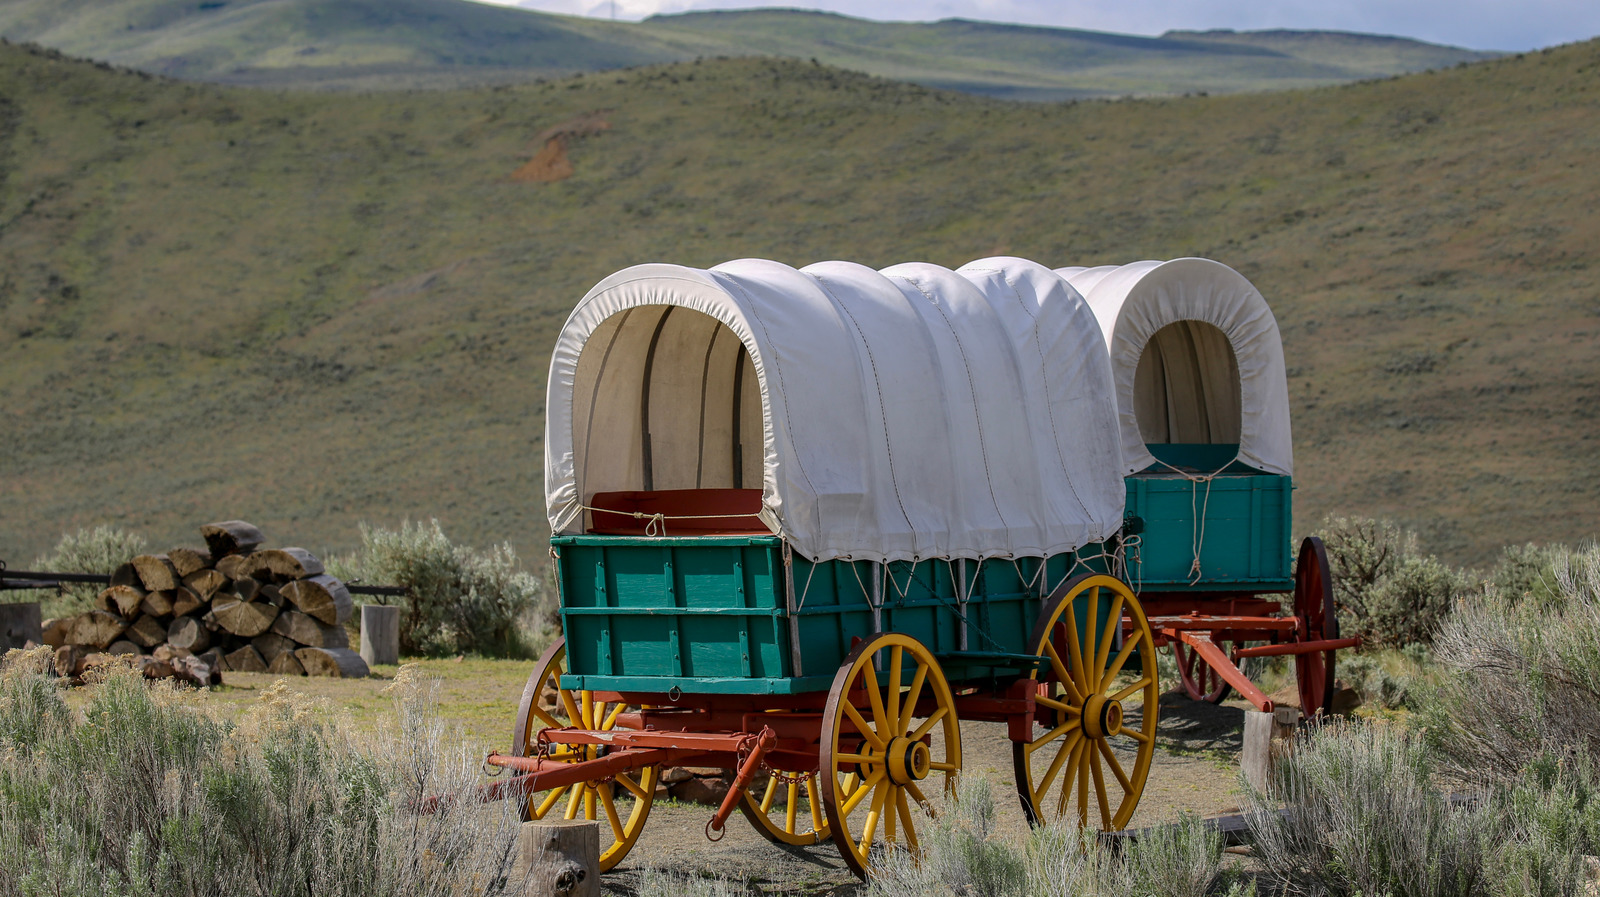 What Was It Really Like Pioneering The Oregon Trail?